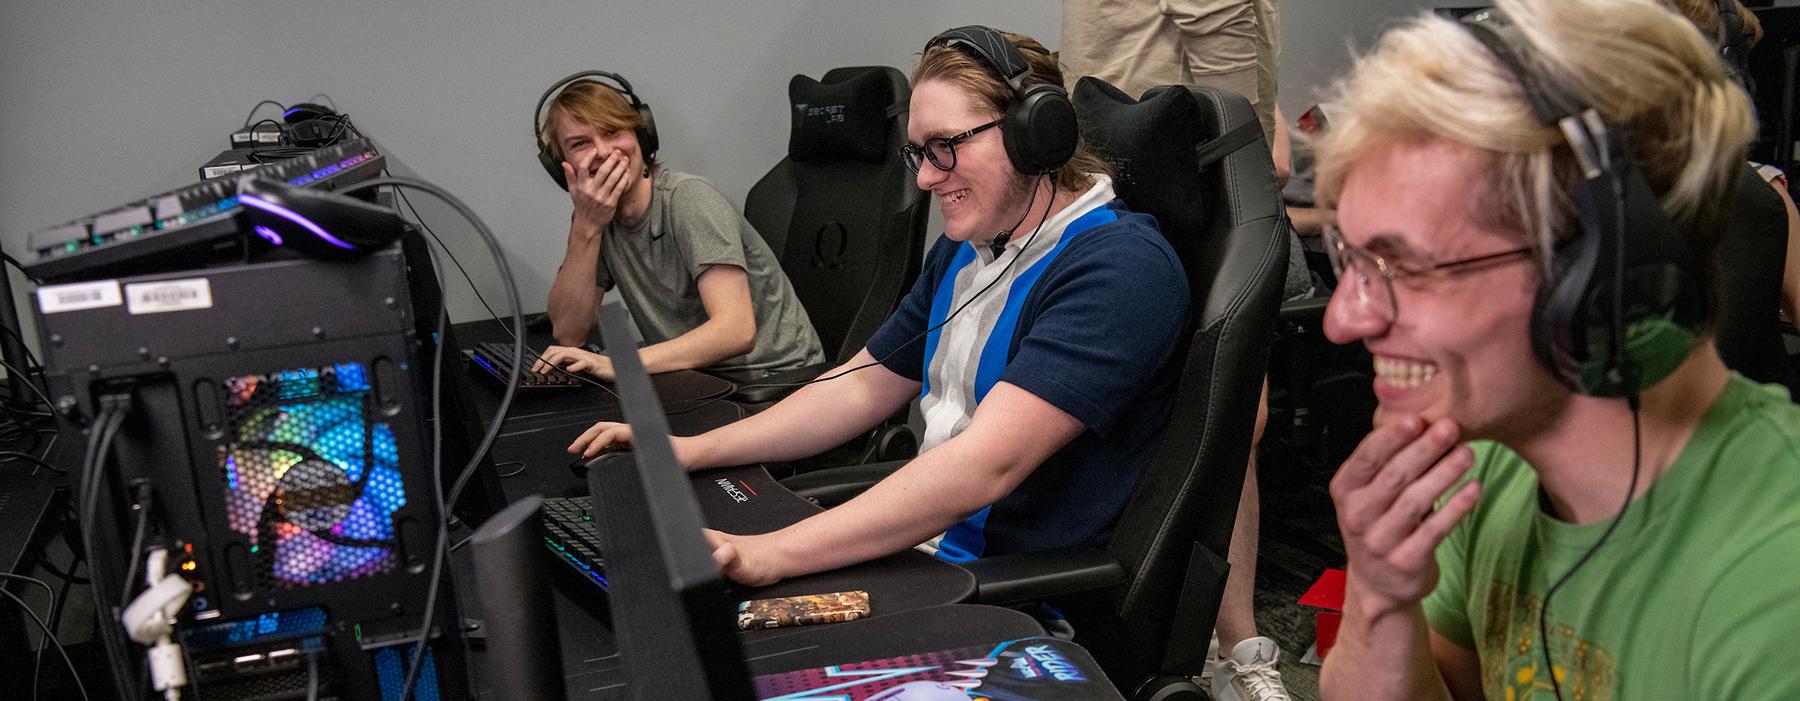 Ohio University students play videogames in the esports arena